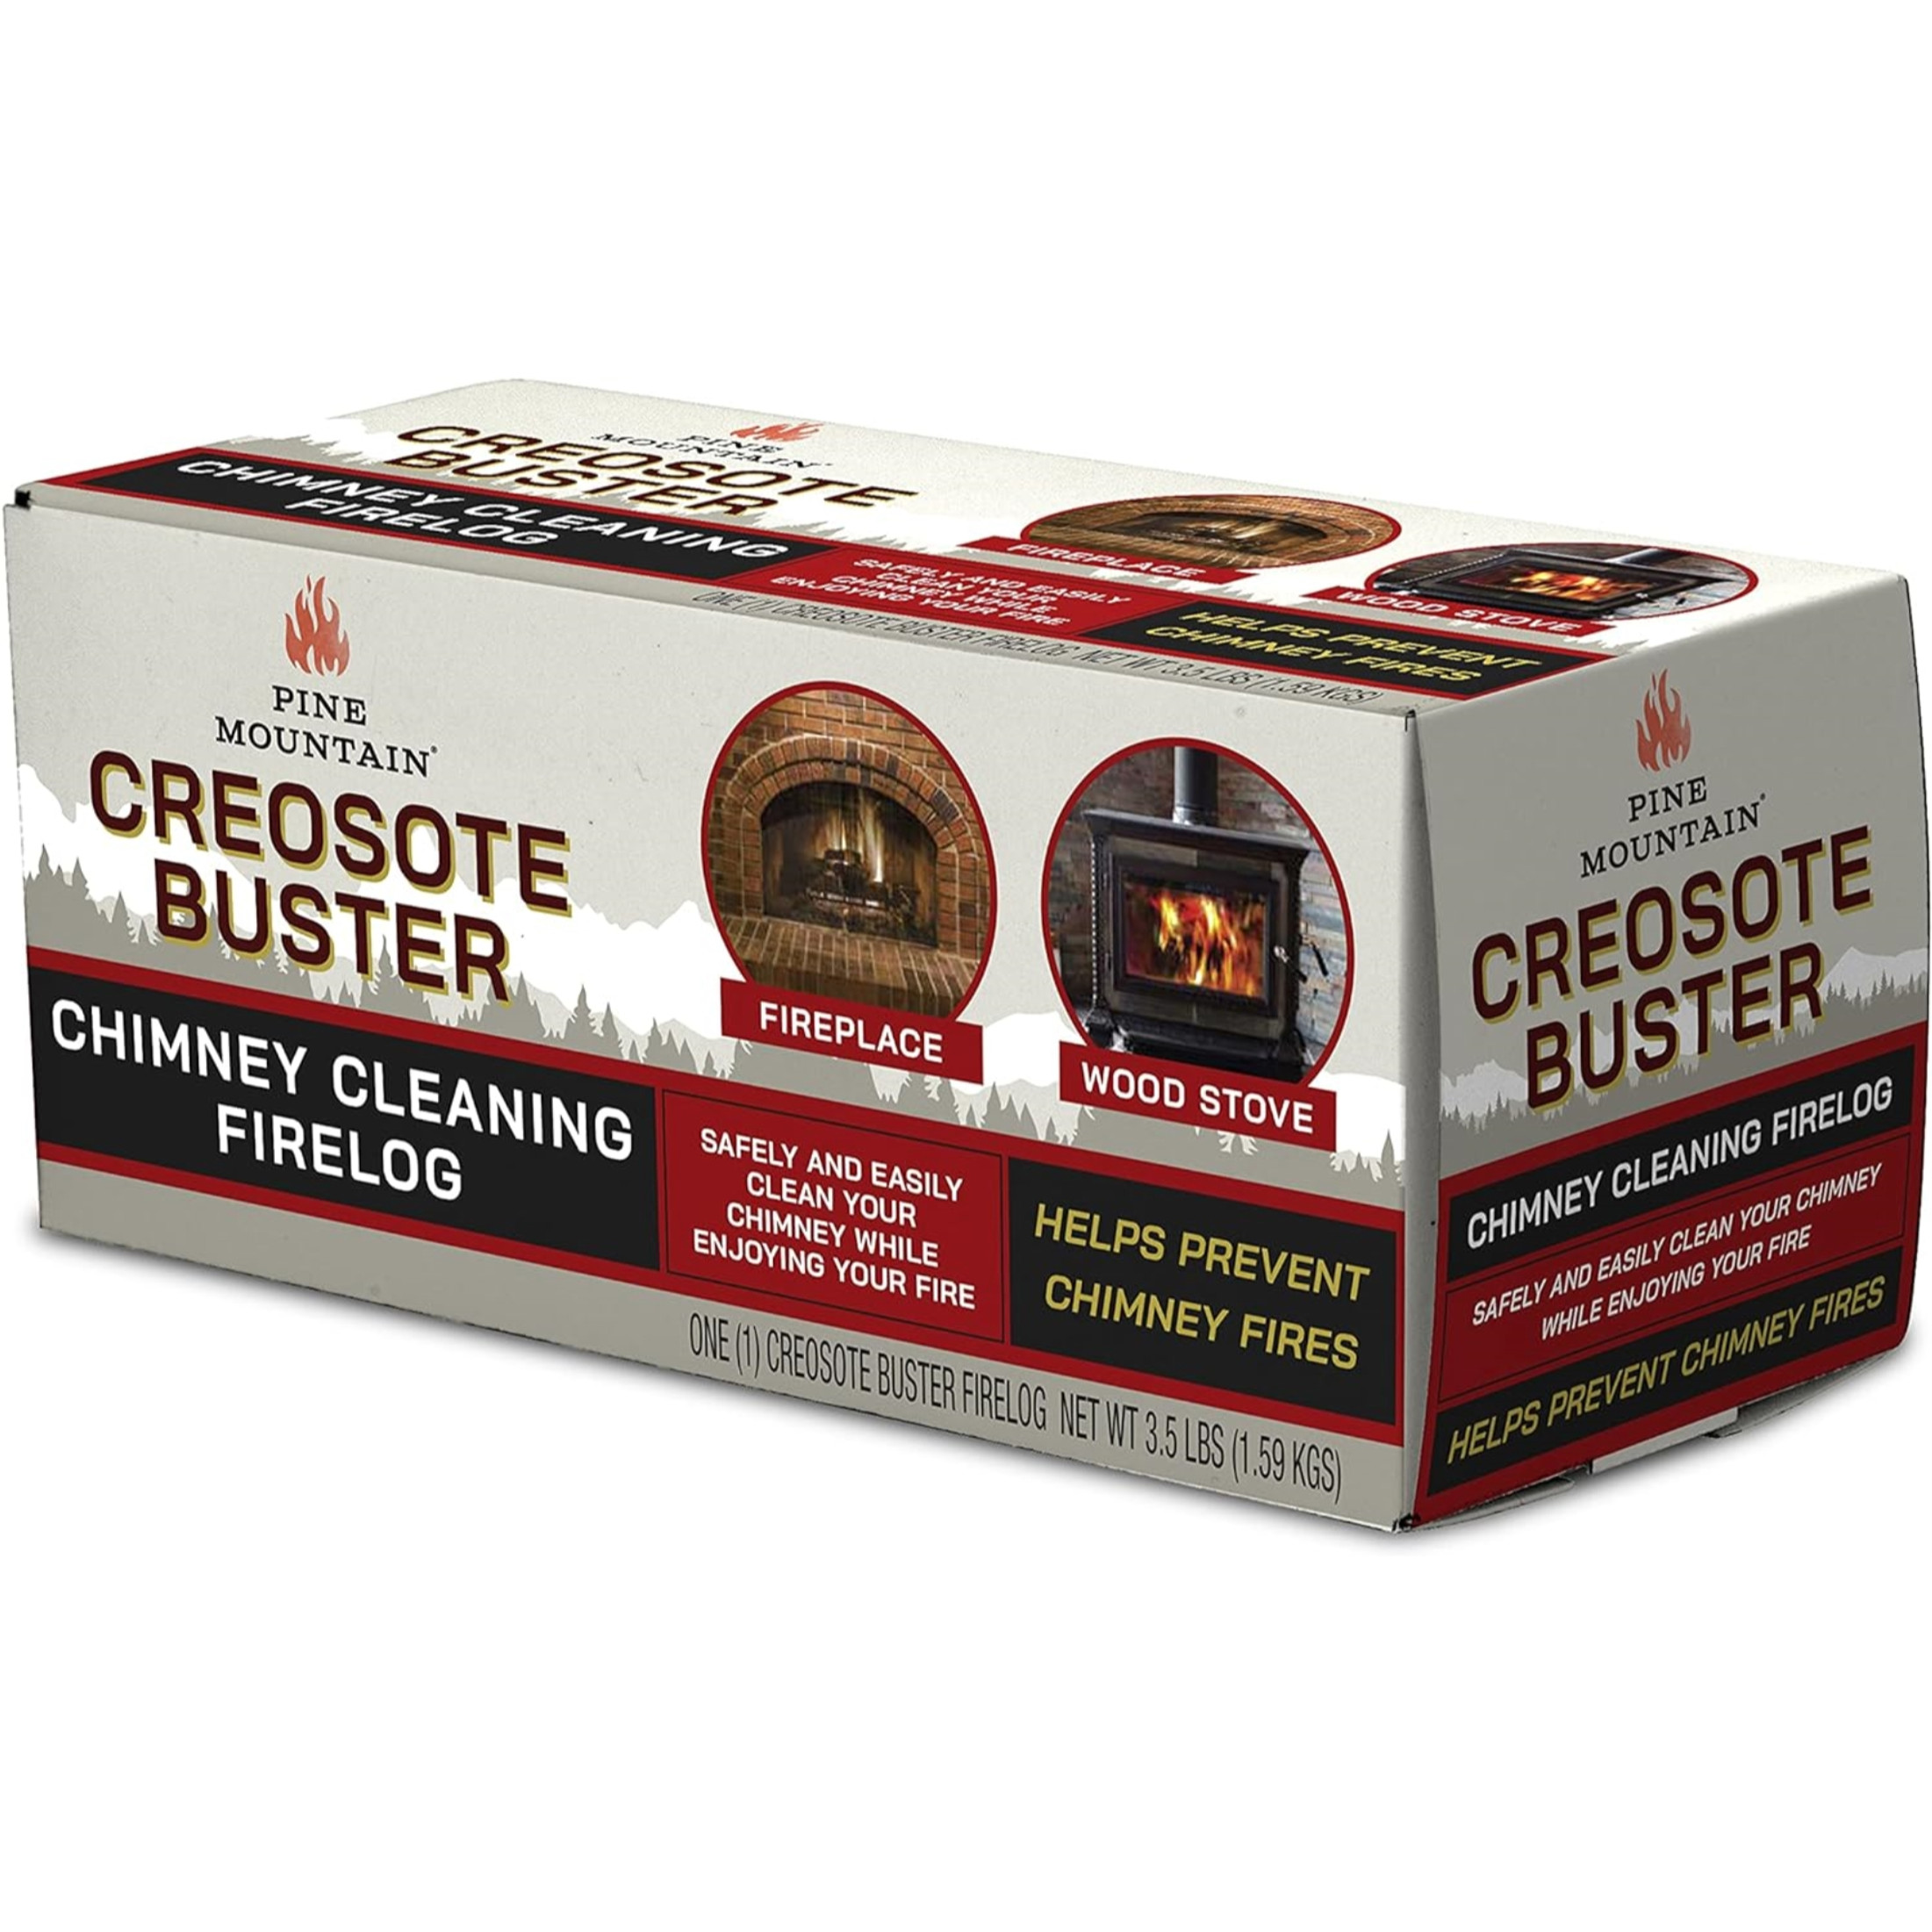 Pine Mountain Creosote Buster Chimney Cleaning Firelog, Helps to Prevent Chimney Fires, 3.5lb (Pack of 1)